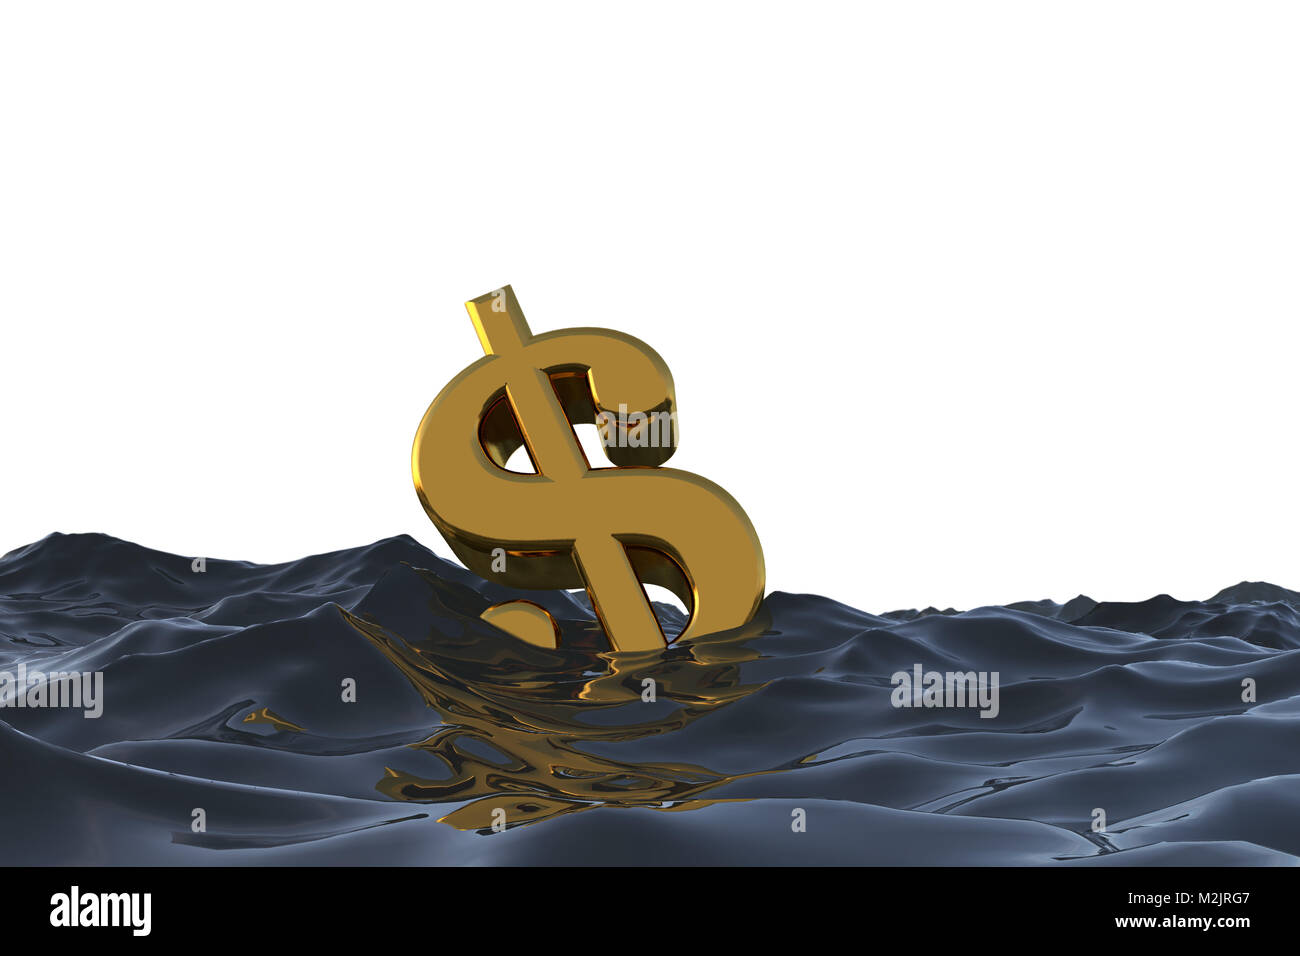 Dollar currency symbol at sea. Drowning in debt financial problem concept. 3D rendering Stock Photo